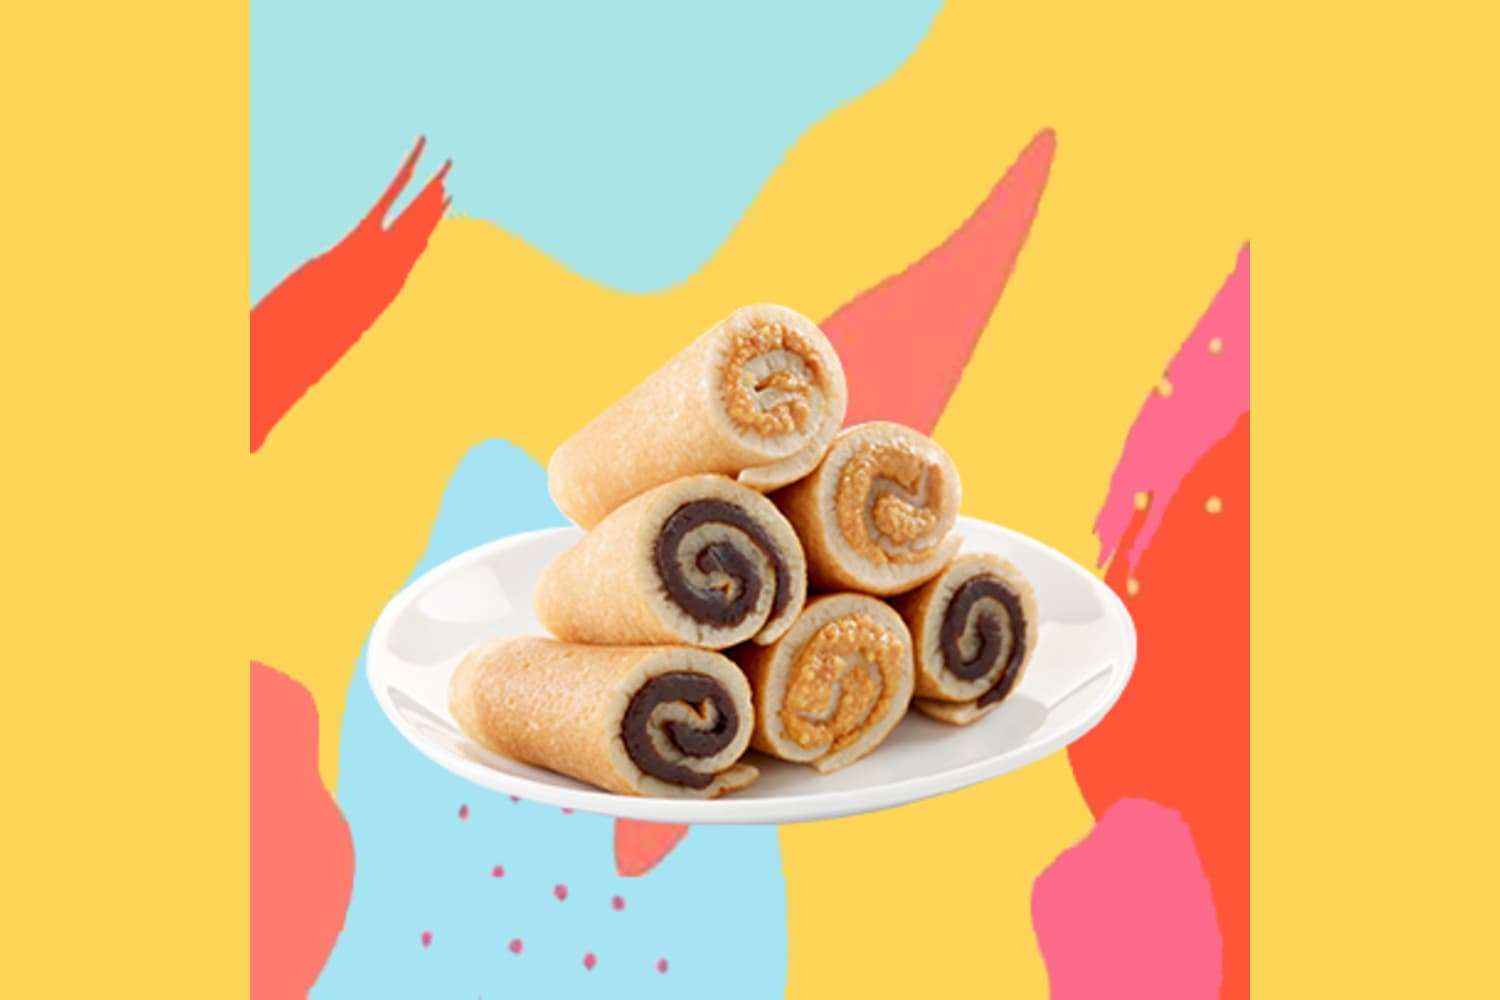 1 x 6-in-1 Mixed Mini Rolls Dessert at Jollibean - Get Deals, Cashback and Rewards with ShopBack GO